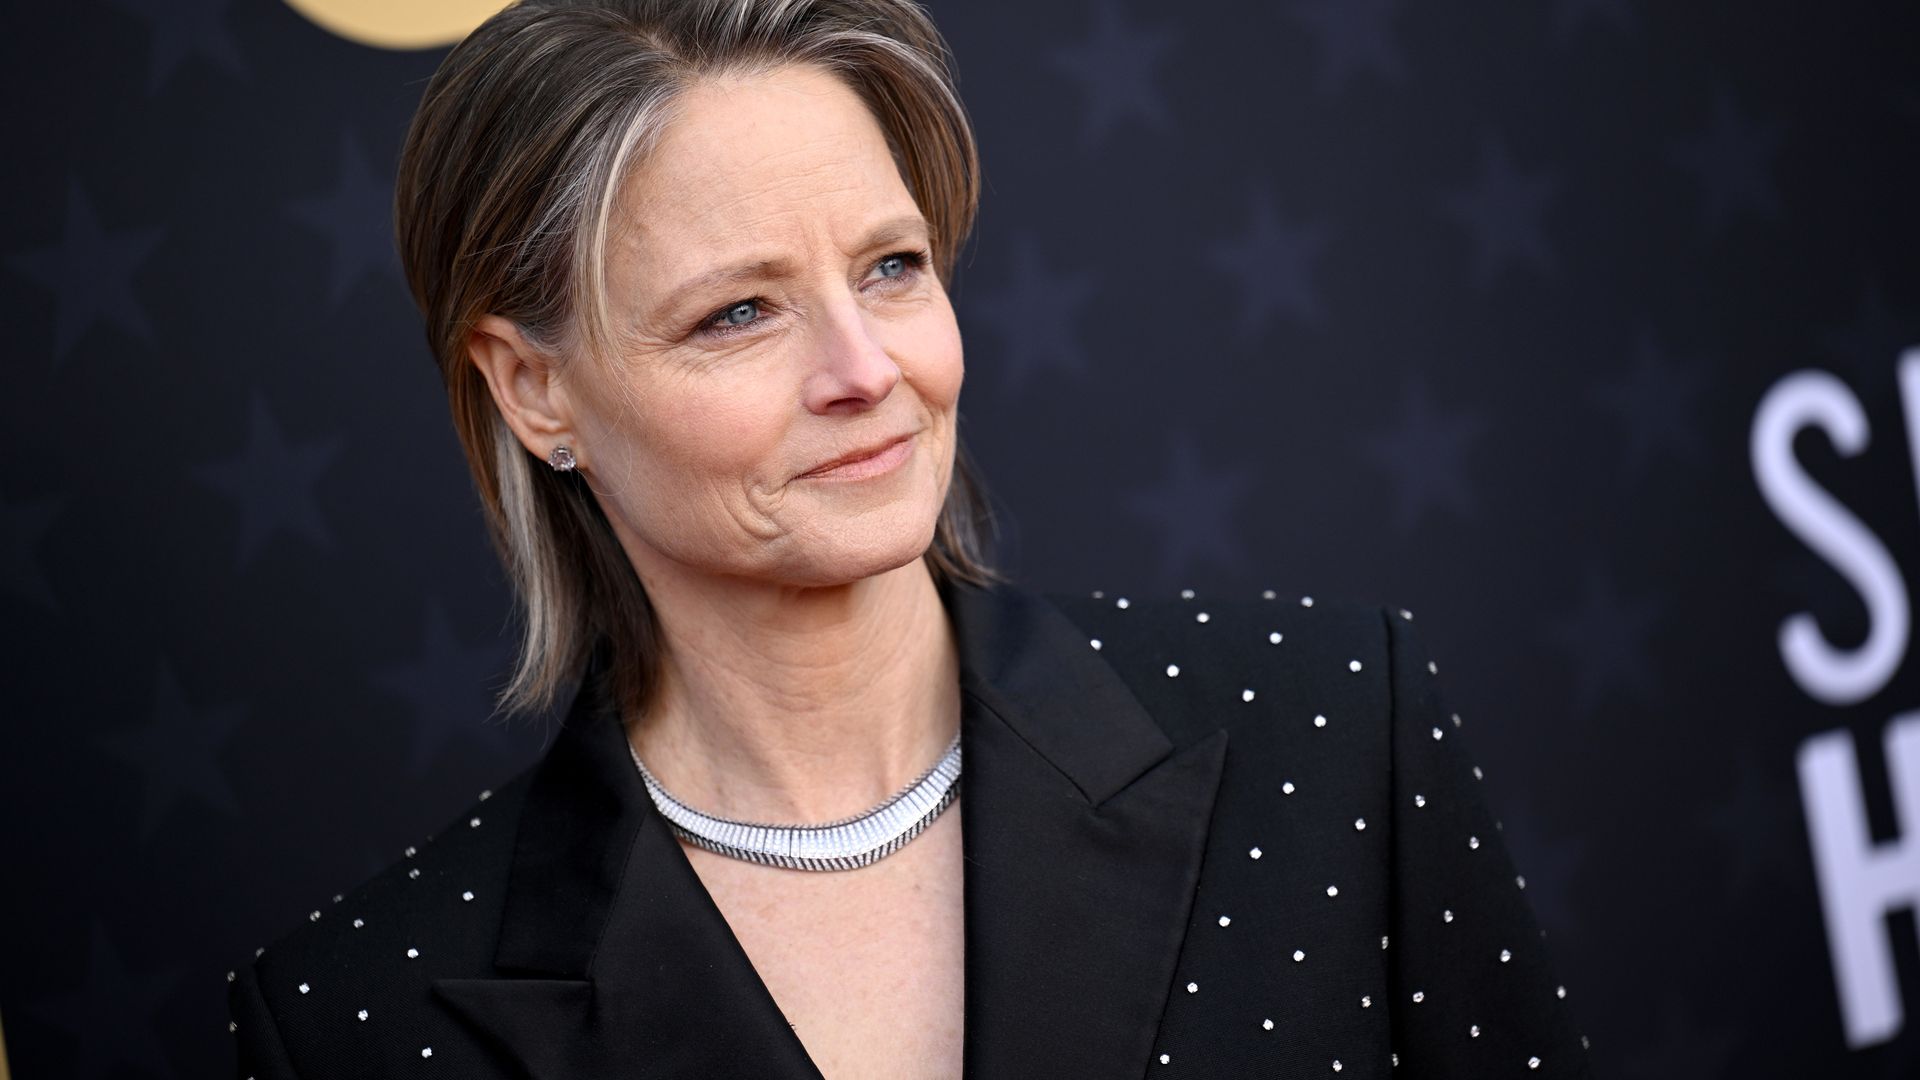 Jodie Foster shares sons Kit and Charles with her ex Cydney Bernard